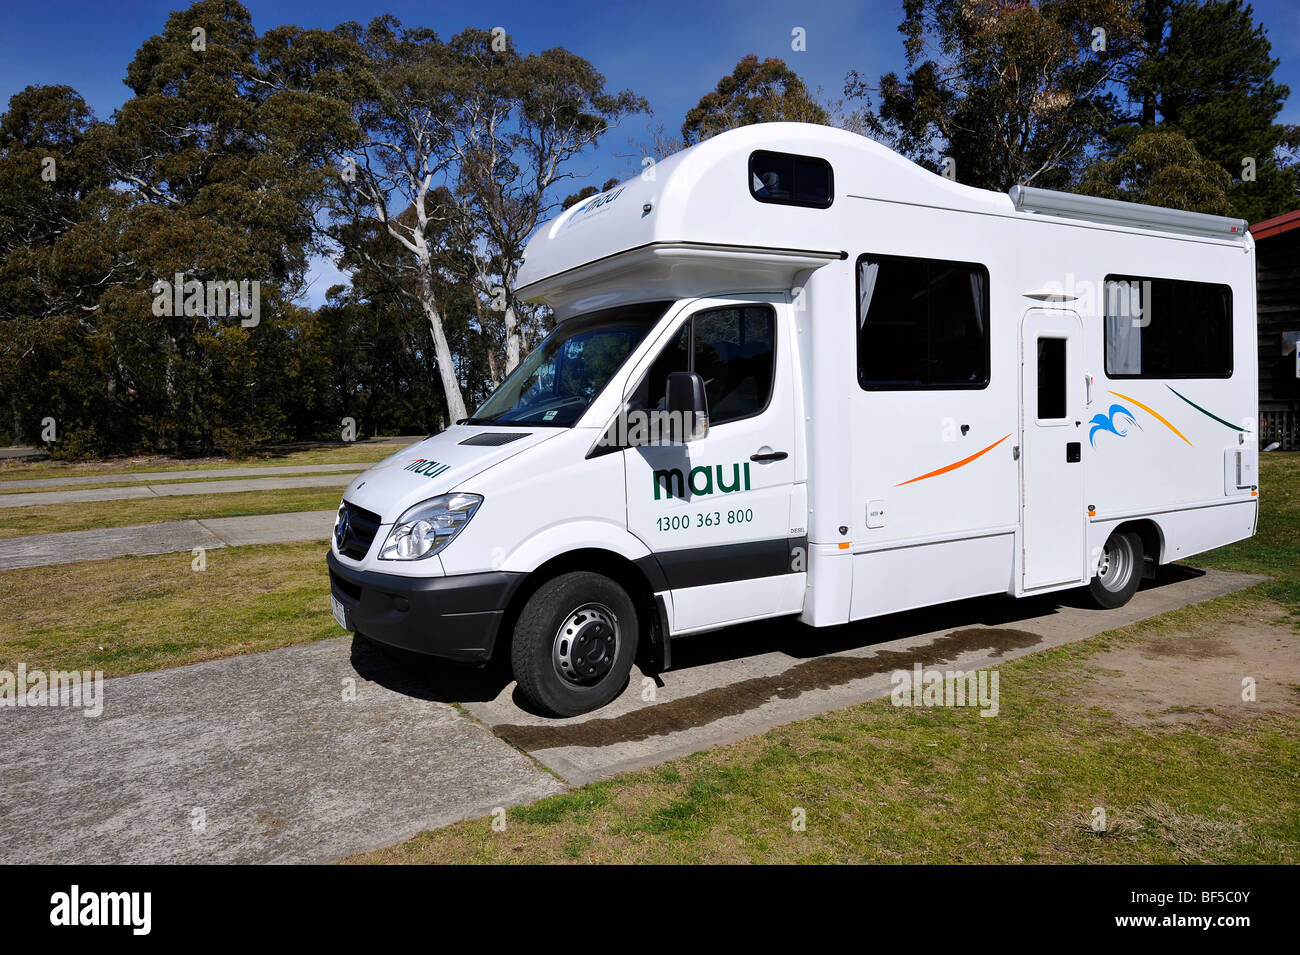 Camper, camping grounds, Katoomba, Blue Mountains National Park, New South Wales, Australia Stock Photo